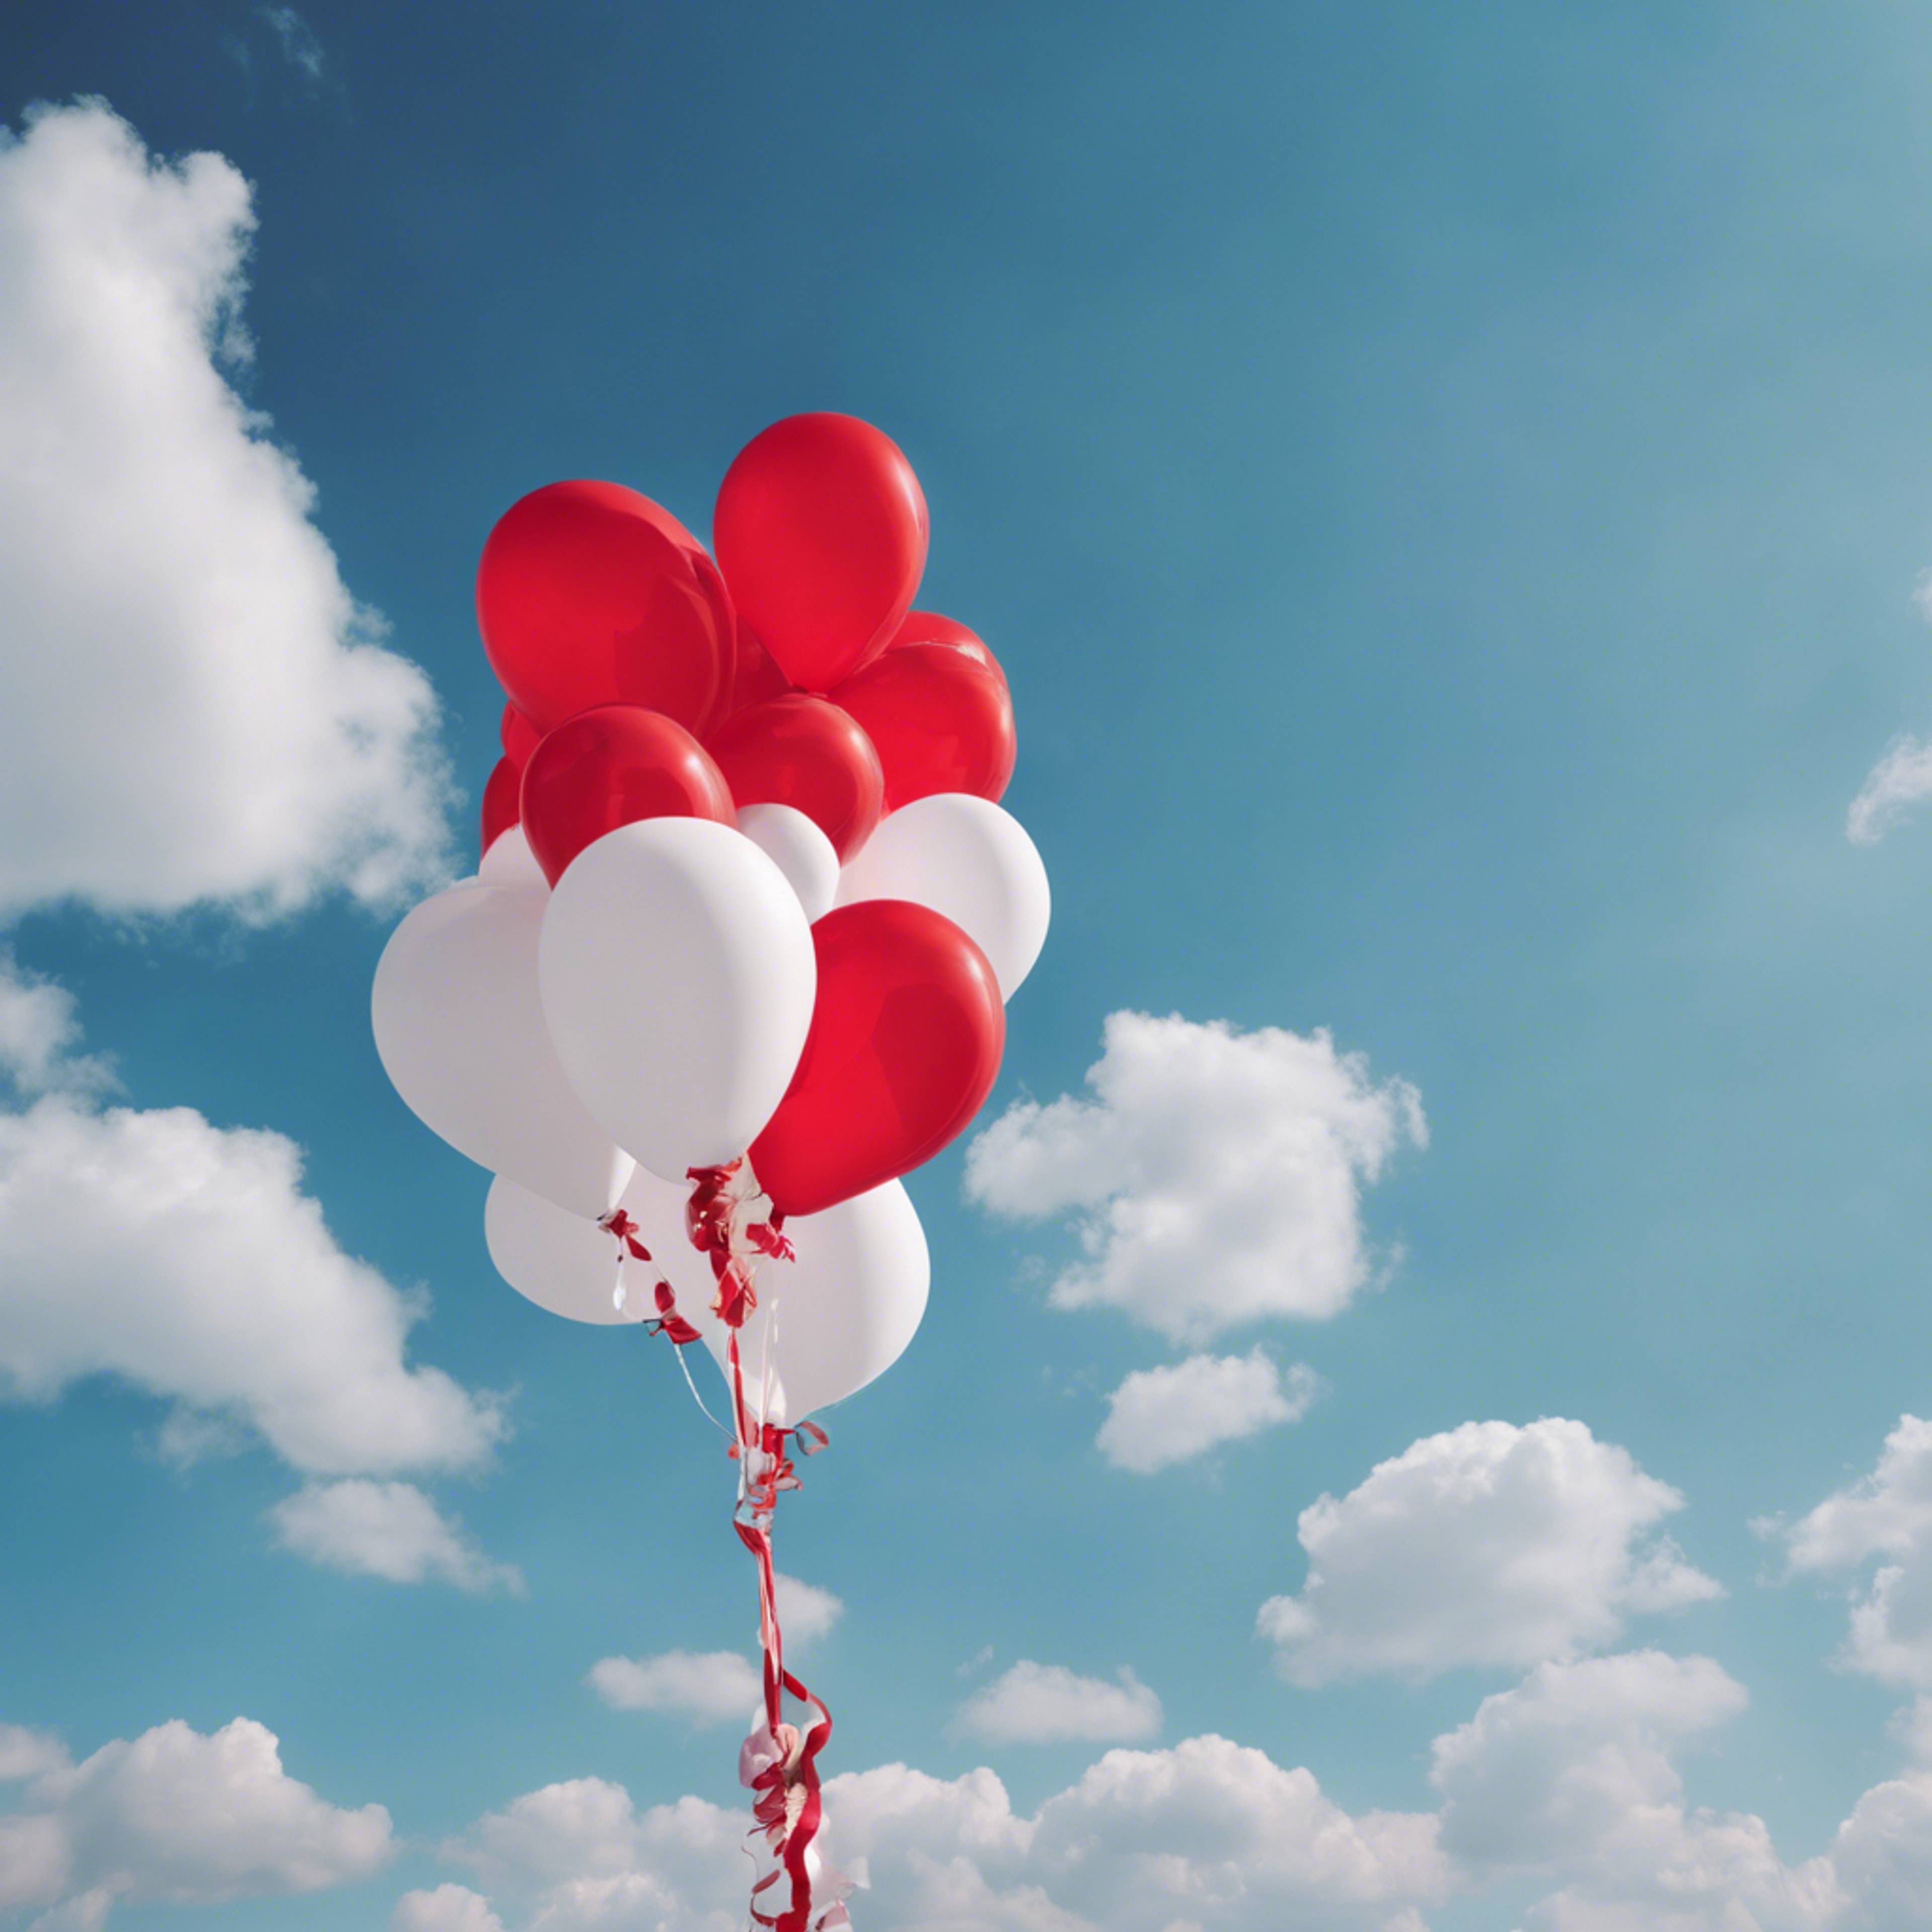 Festive red and white balloons strung together against the blue sky. 墙纸[5b7b2fc281444a4c8d70]